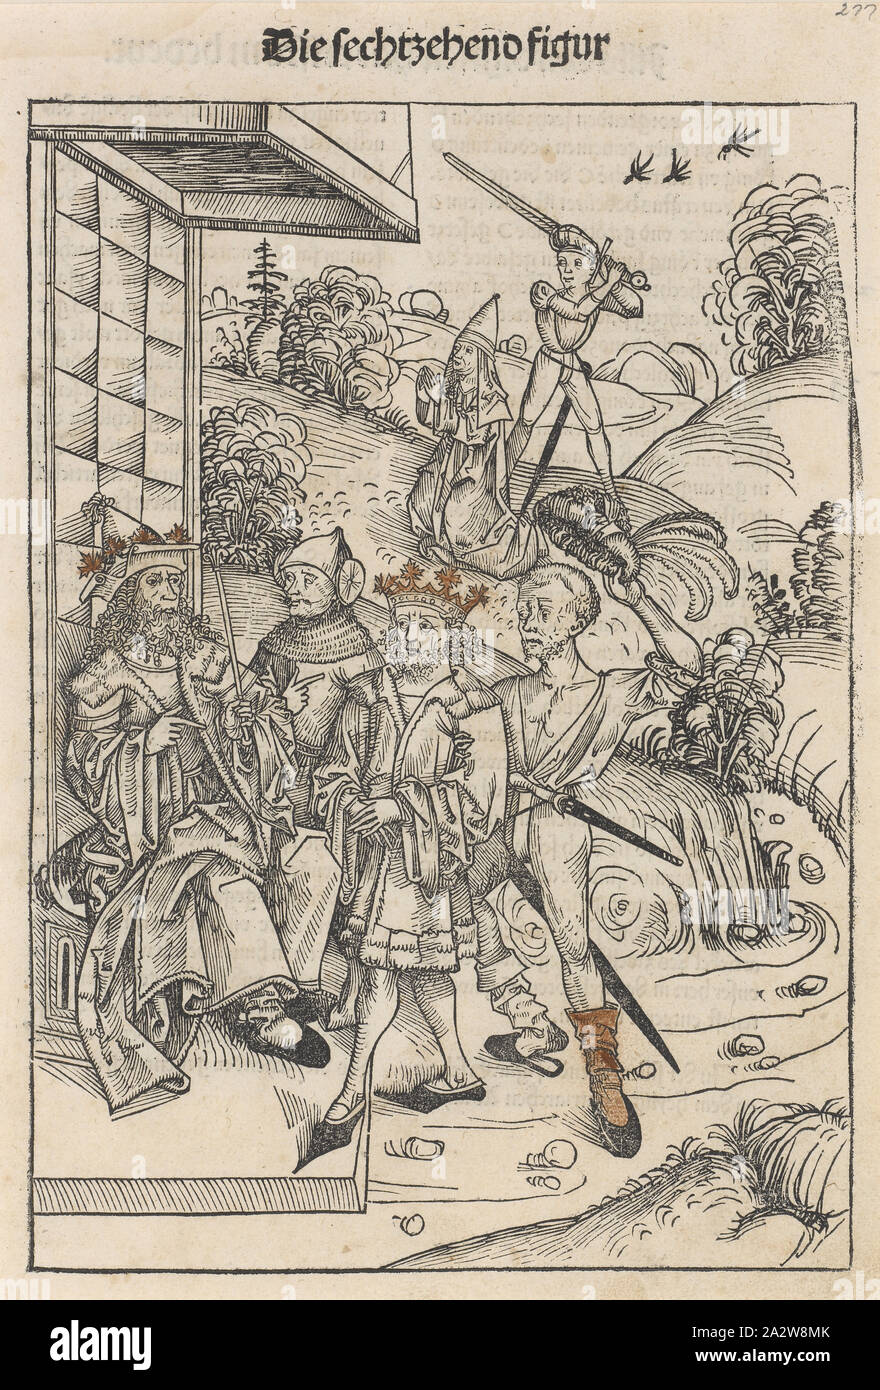 The Bloodthirsty King, Michael Wohlgemuth (German, 1434-1519), 1491, woodblock print with touches of watercolor on off-white laid paper, 11-1/2 x 8-1/4 in. (sheet), series, Schatzbehalter Stock Photo